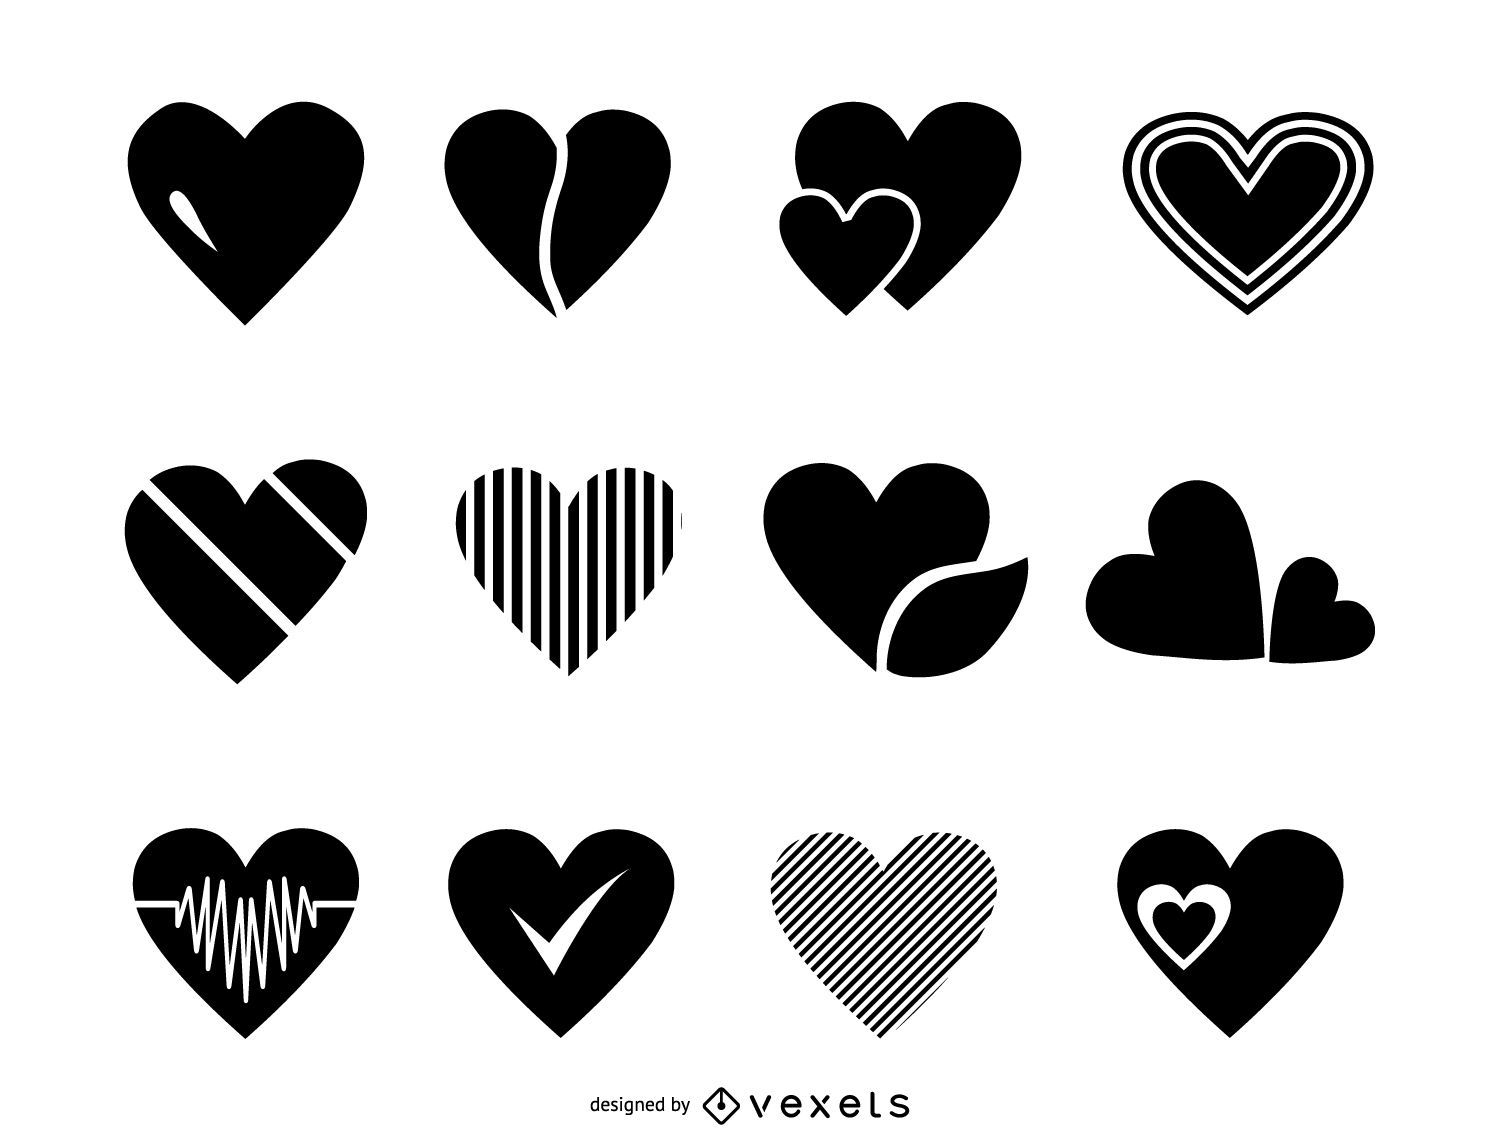 Heart Logo Vector Images (over 170,000)